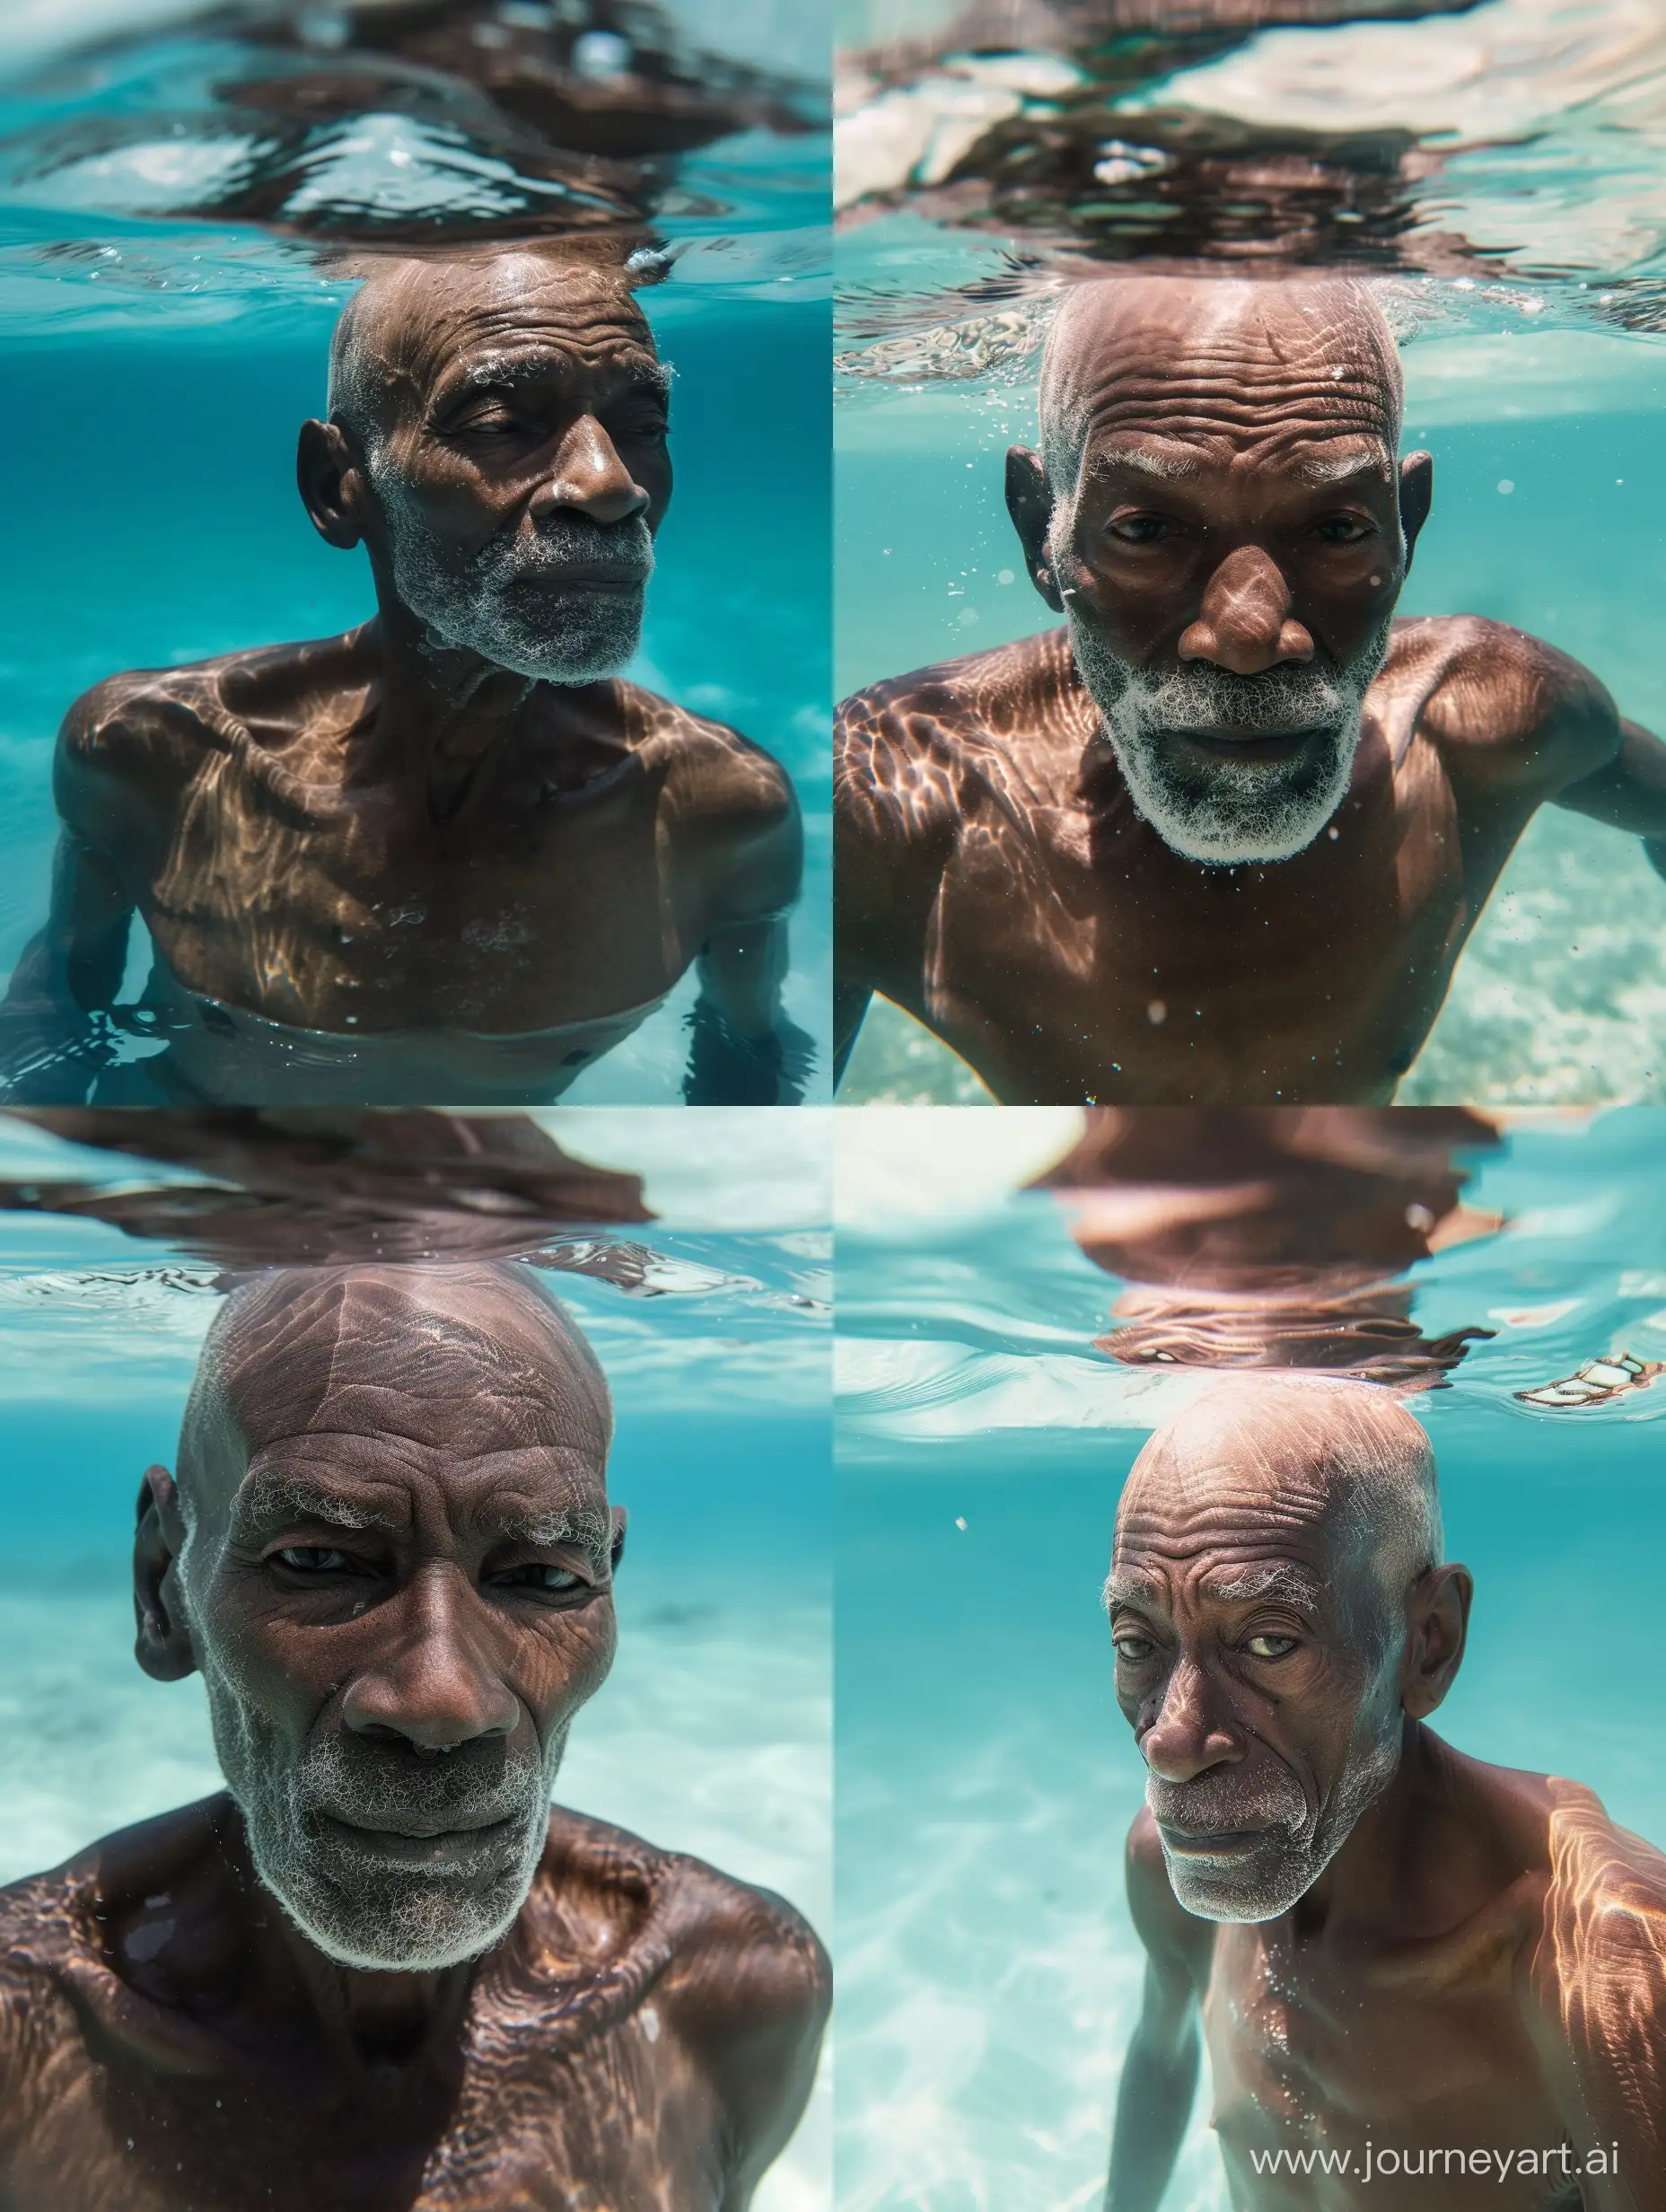 Old African bald man in the clear ocean. Under water